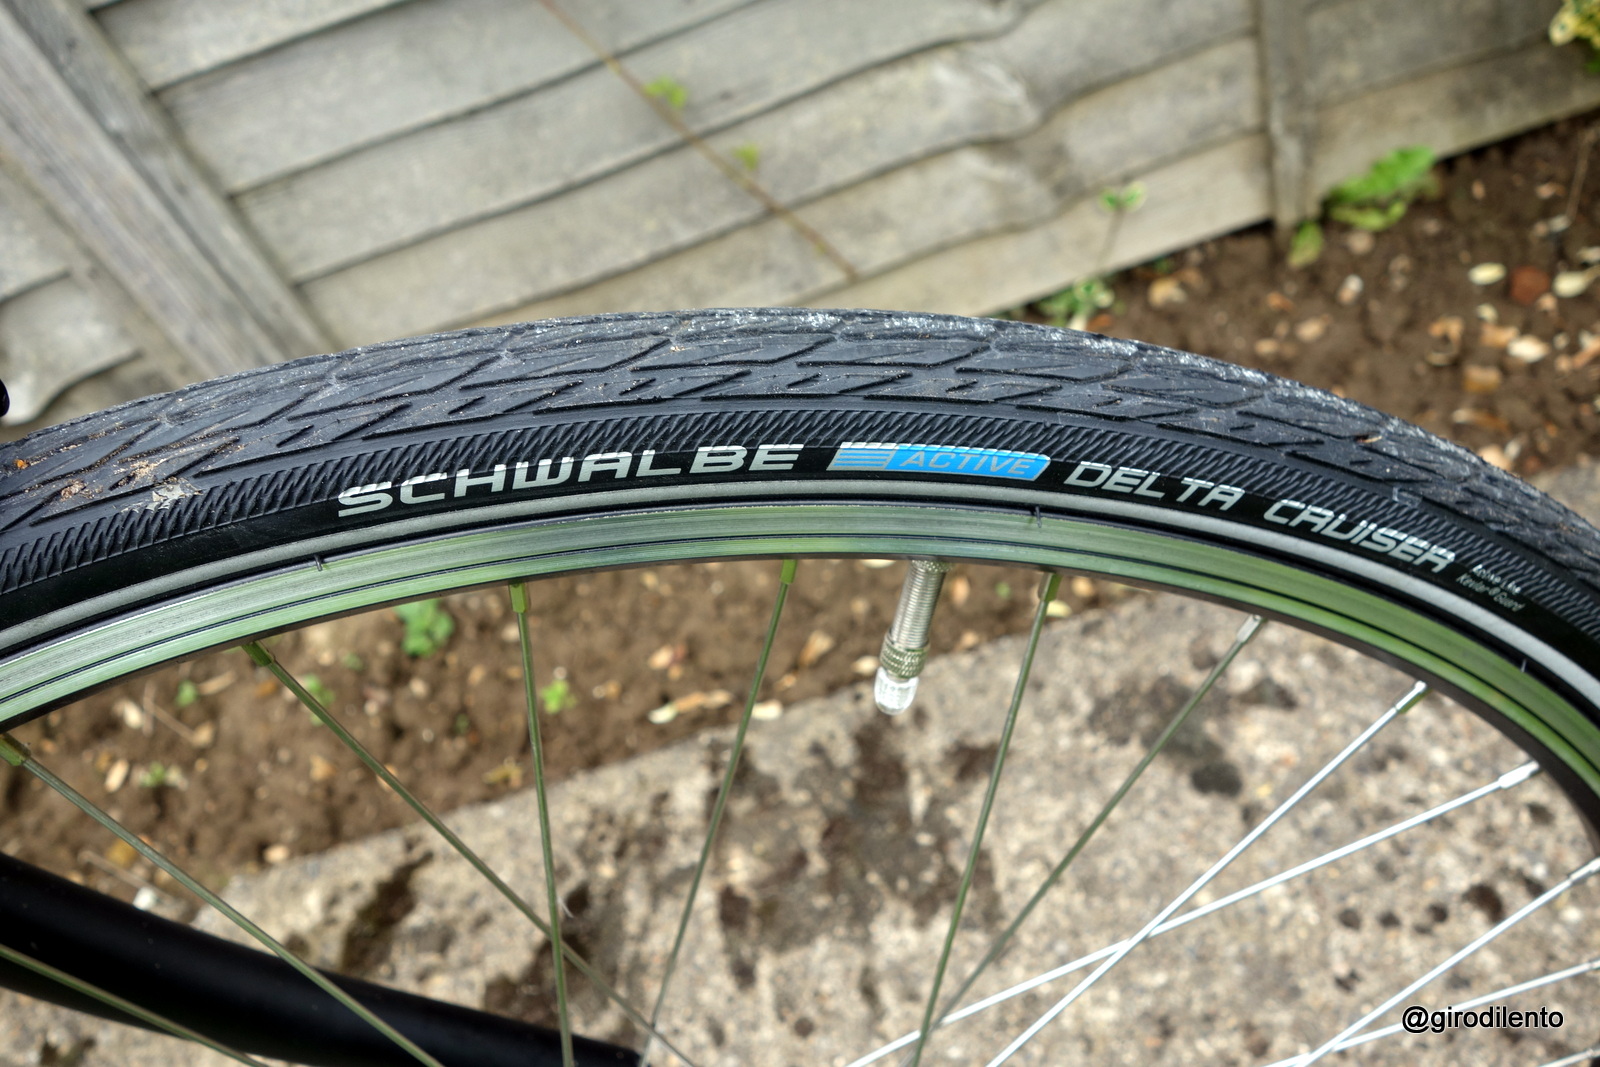 Quality Schwalbe tyres that haven't needed pumping up in a month